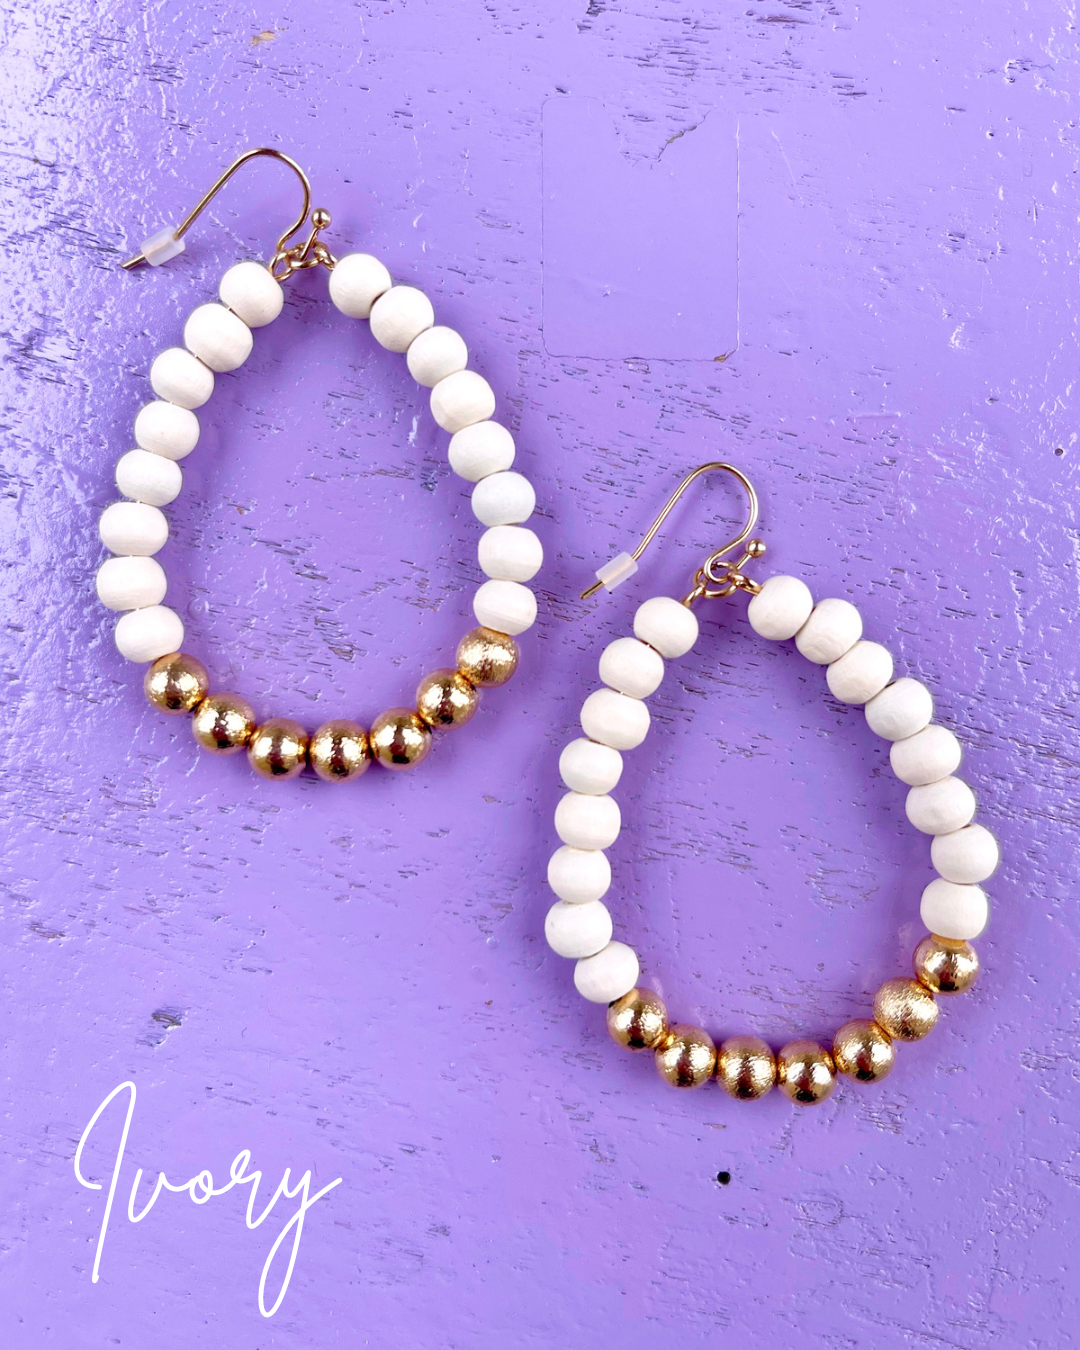 Dancing in the Moonlight Earrings-Earrings-Golden Stella-The Village Shoppe, Women’s Fashion Boutique, Shop Online and In Store - Located in Muscle Shoals, AL.